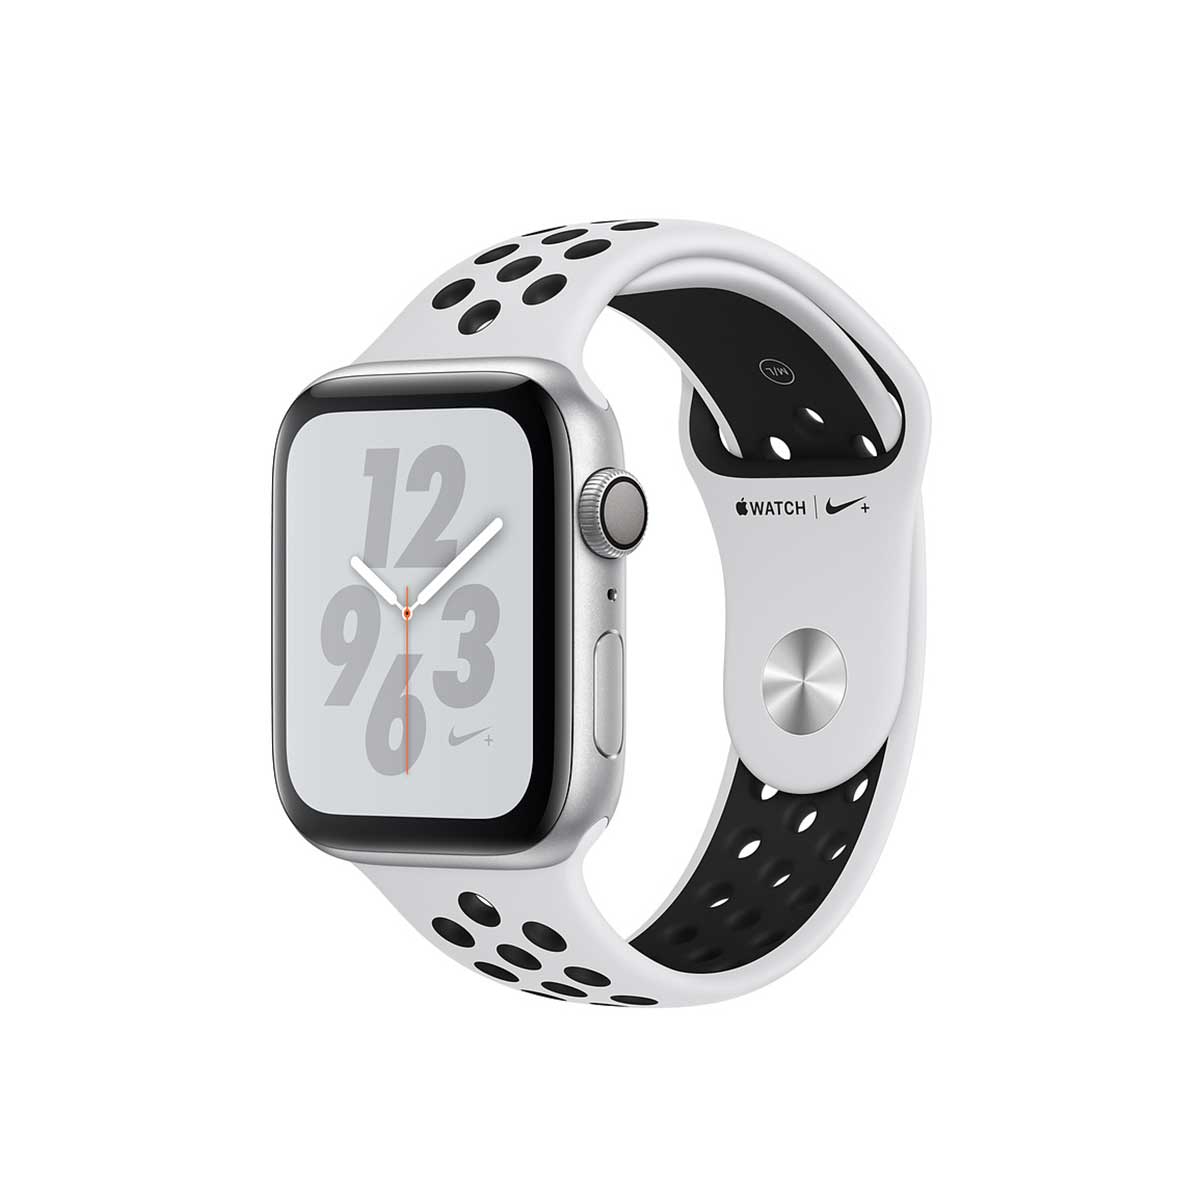 Apple Watch Nike+ Series 4 GPS, 44mm Silver Aluminum Case with Pure Platinum/Black Nike Sport Band